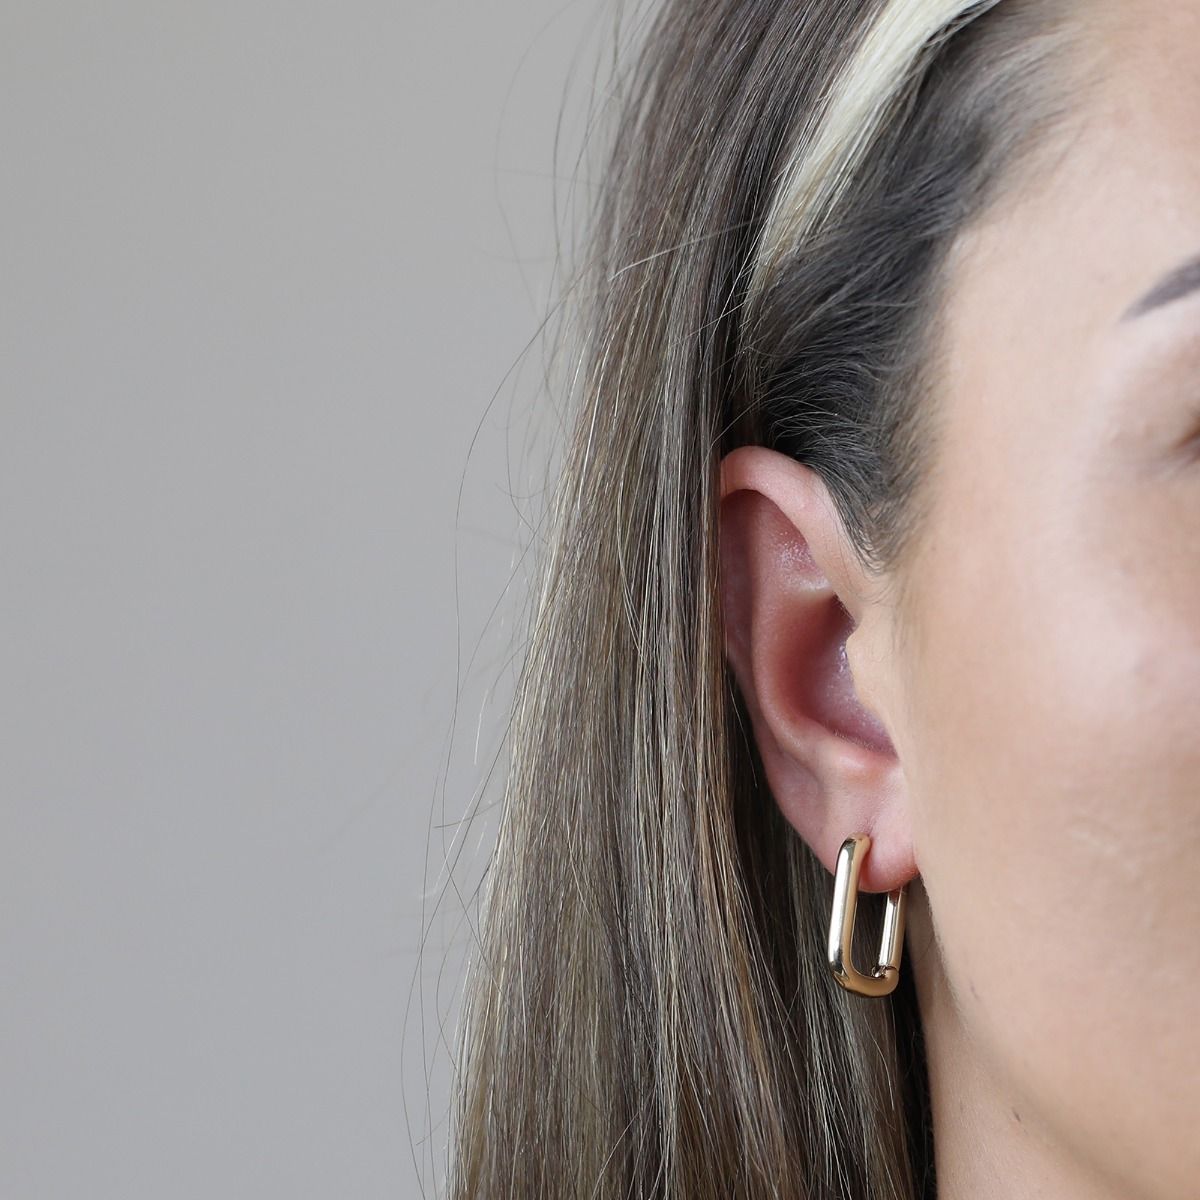 The Rectangle Polished Gold Hoop Earrings are a contemporary and sleek piece. With their polished gold finish and rectangular shape, these hoop earrings exude a modern and sophisticated style. The geometric design adds an element of interest. 